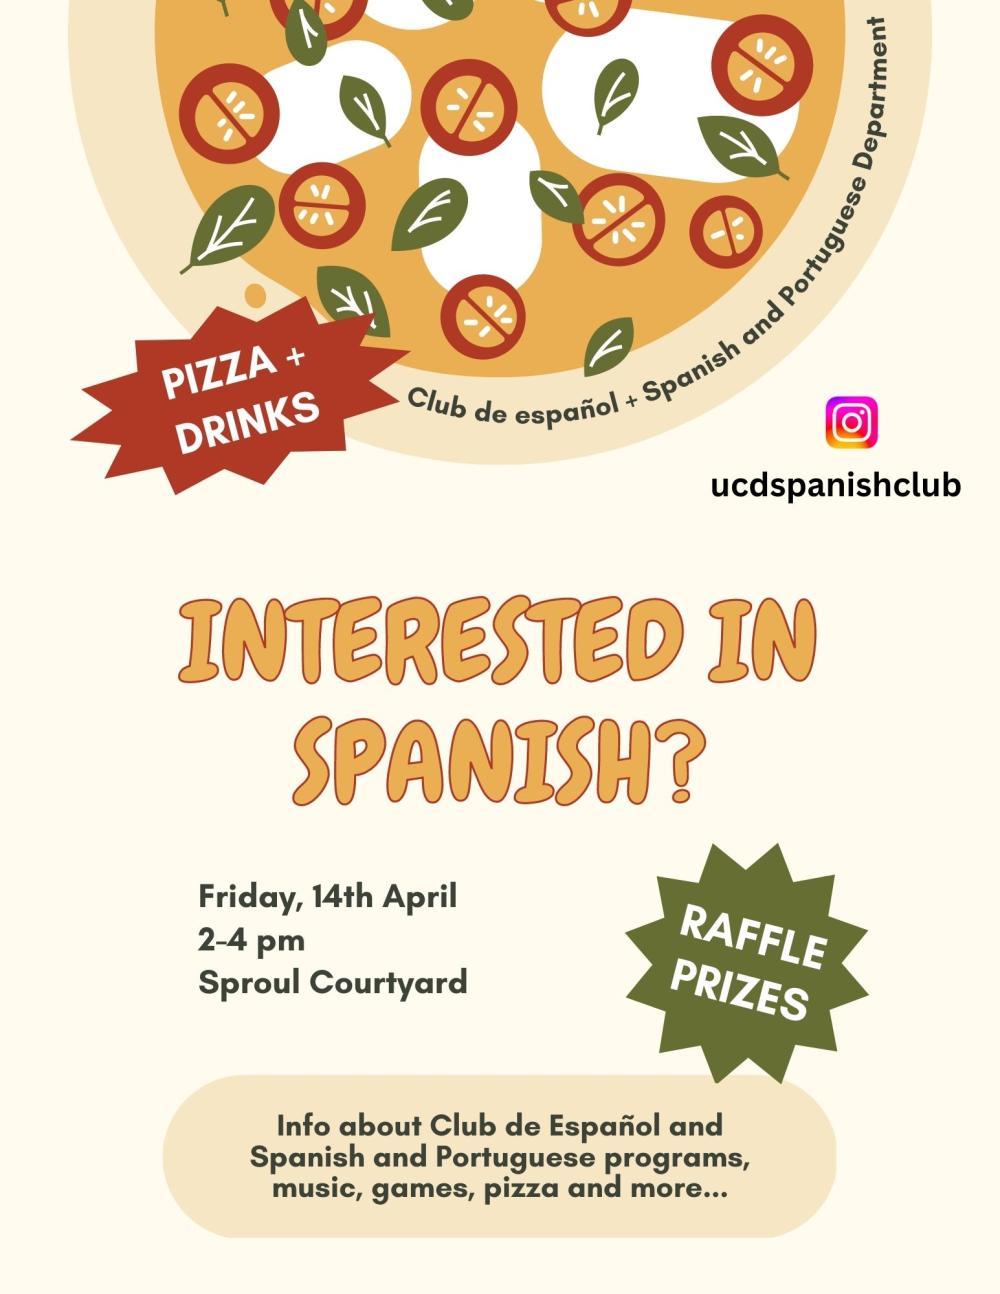 A flyer for the event, featuring a large pizza!